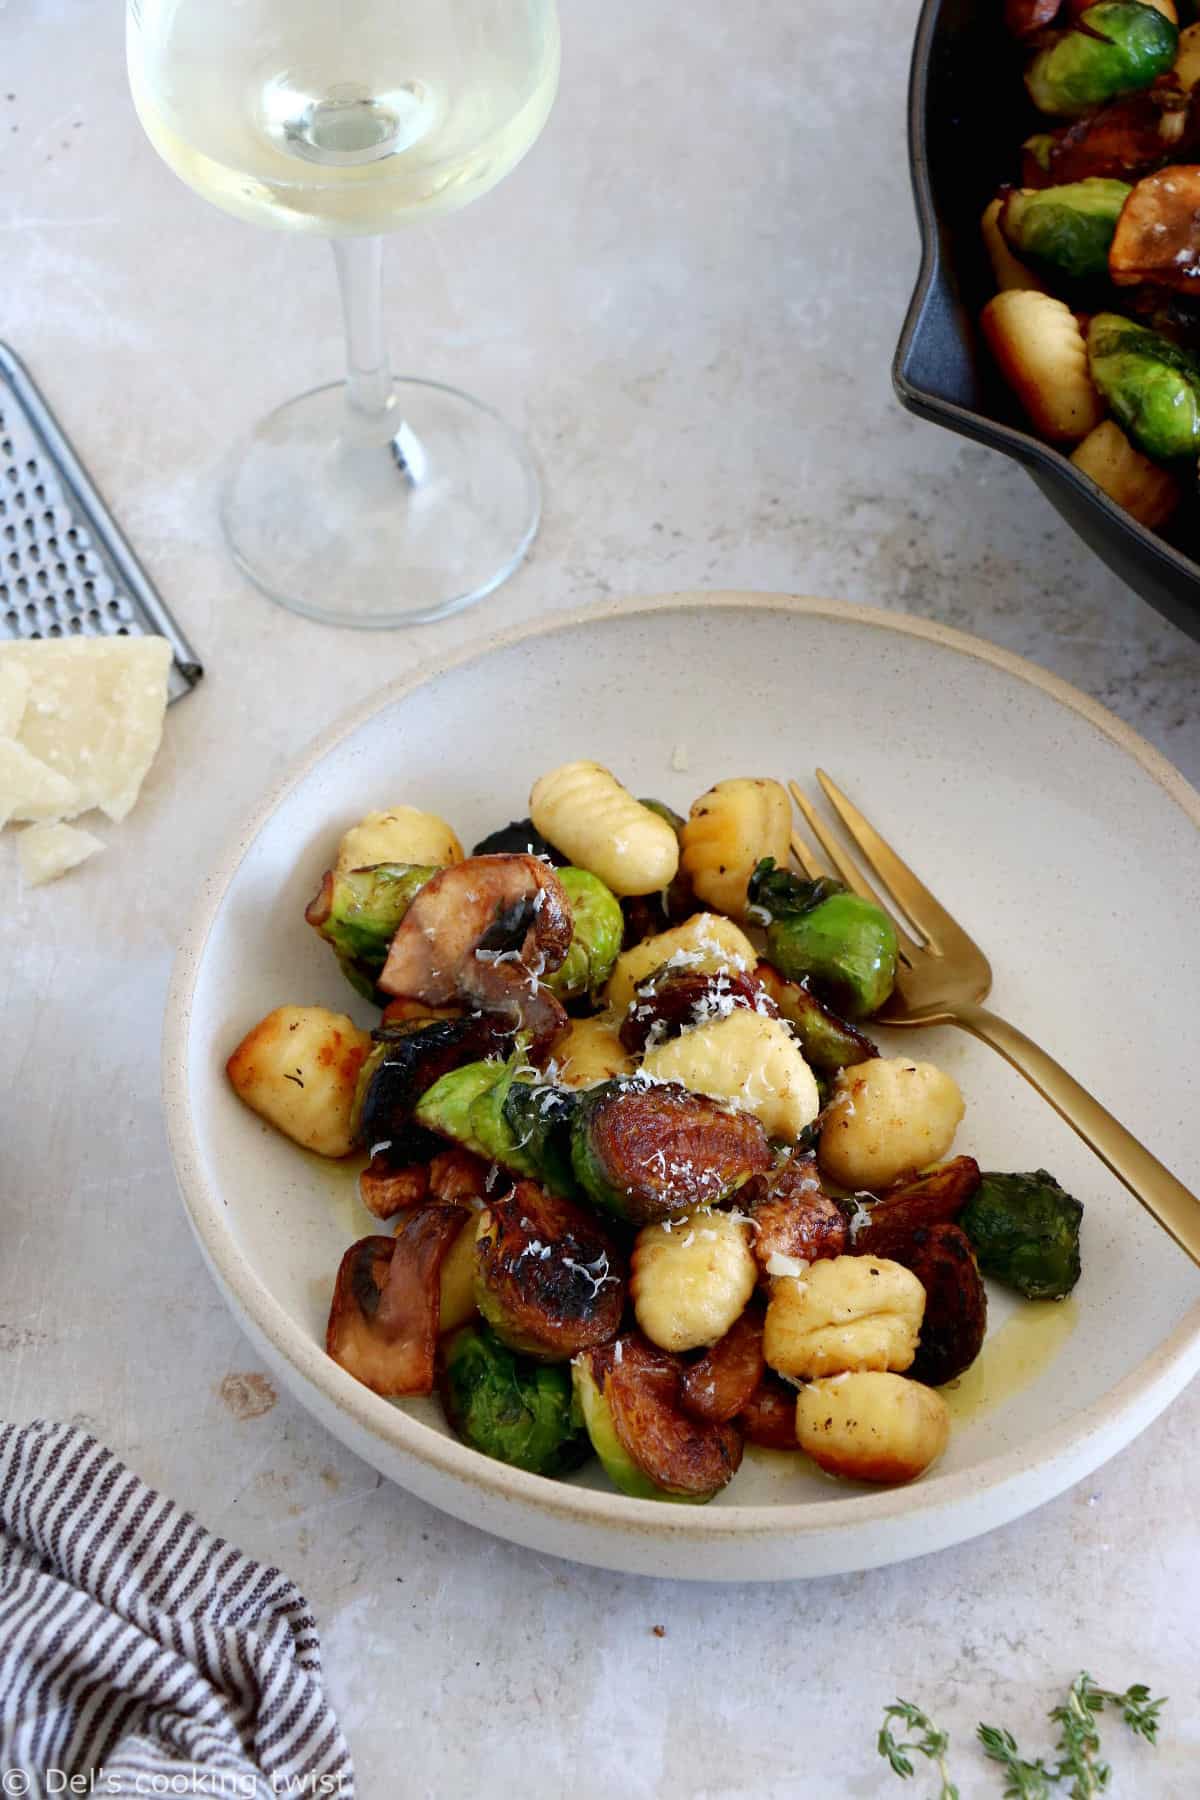 Mushrooms and Brussels sprouts gnocchi feature some crispy maple roasted Brussels sprouts, combined with garlic brown butter pan-fried gnocchi.